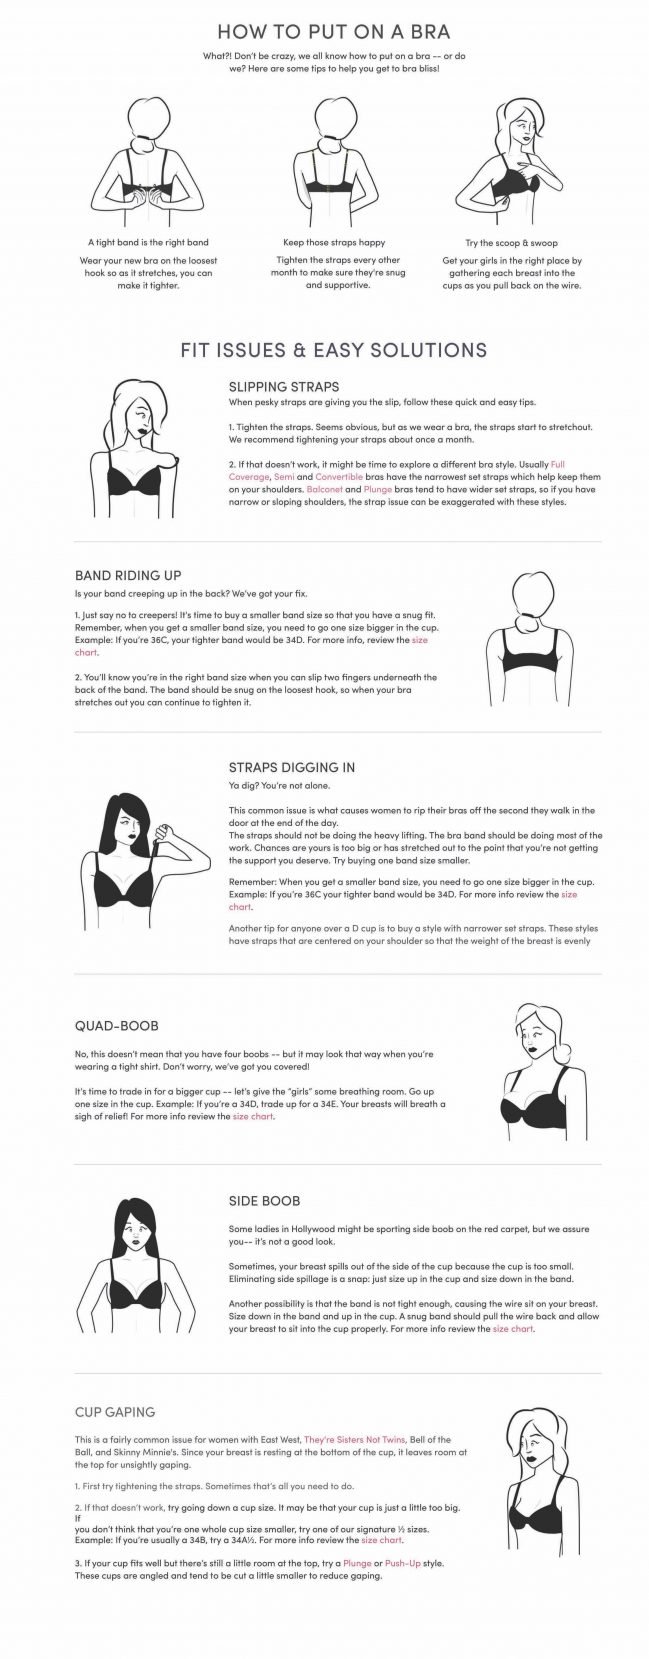 How to Pronounce Brassiere (Correctly!) 